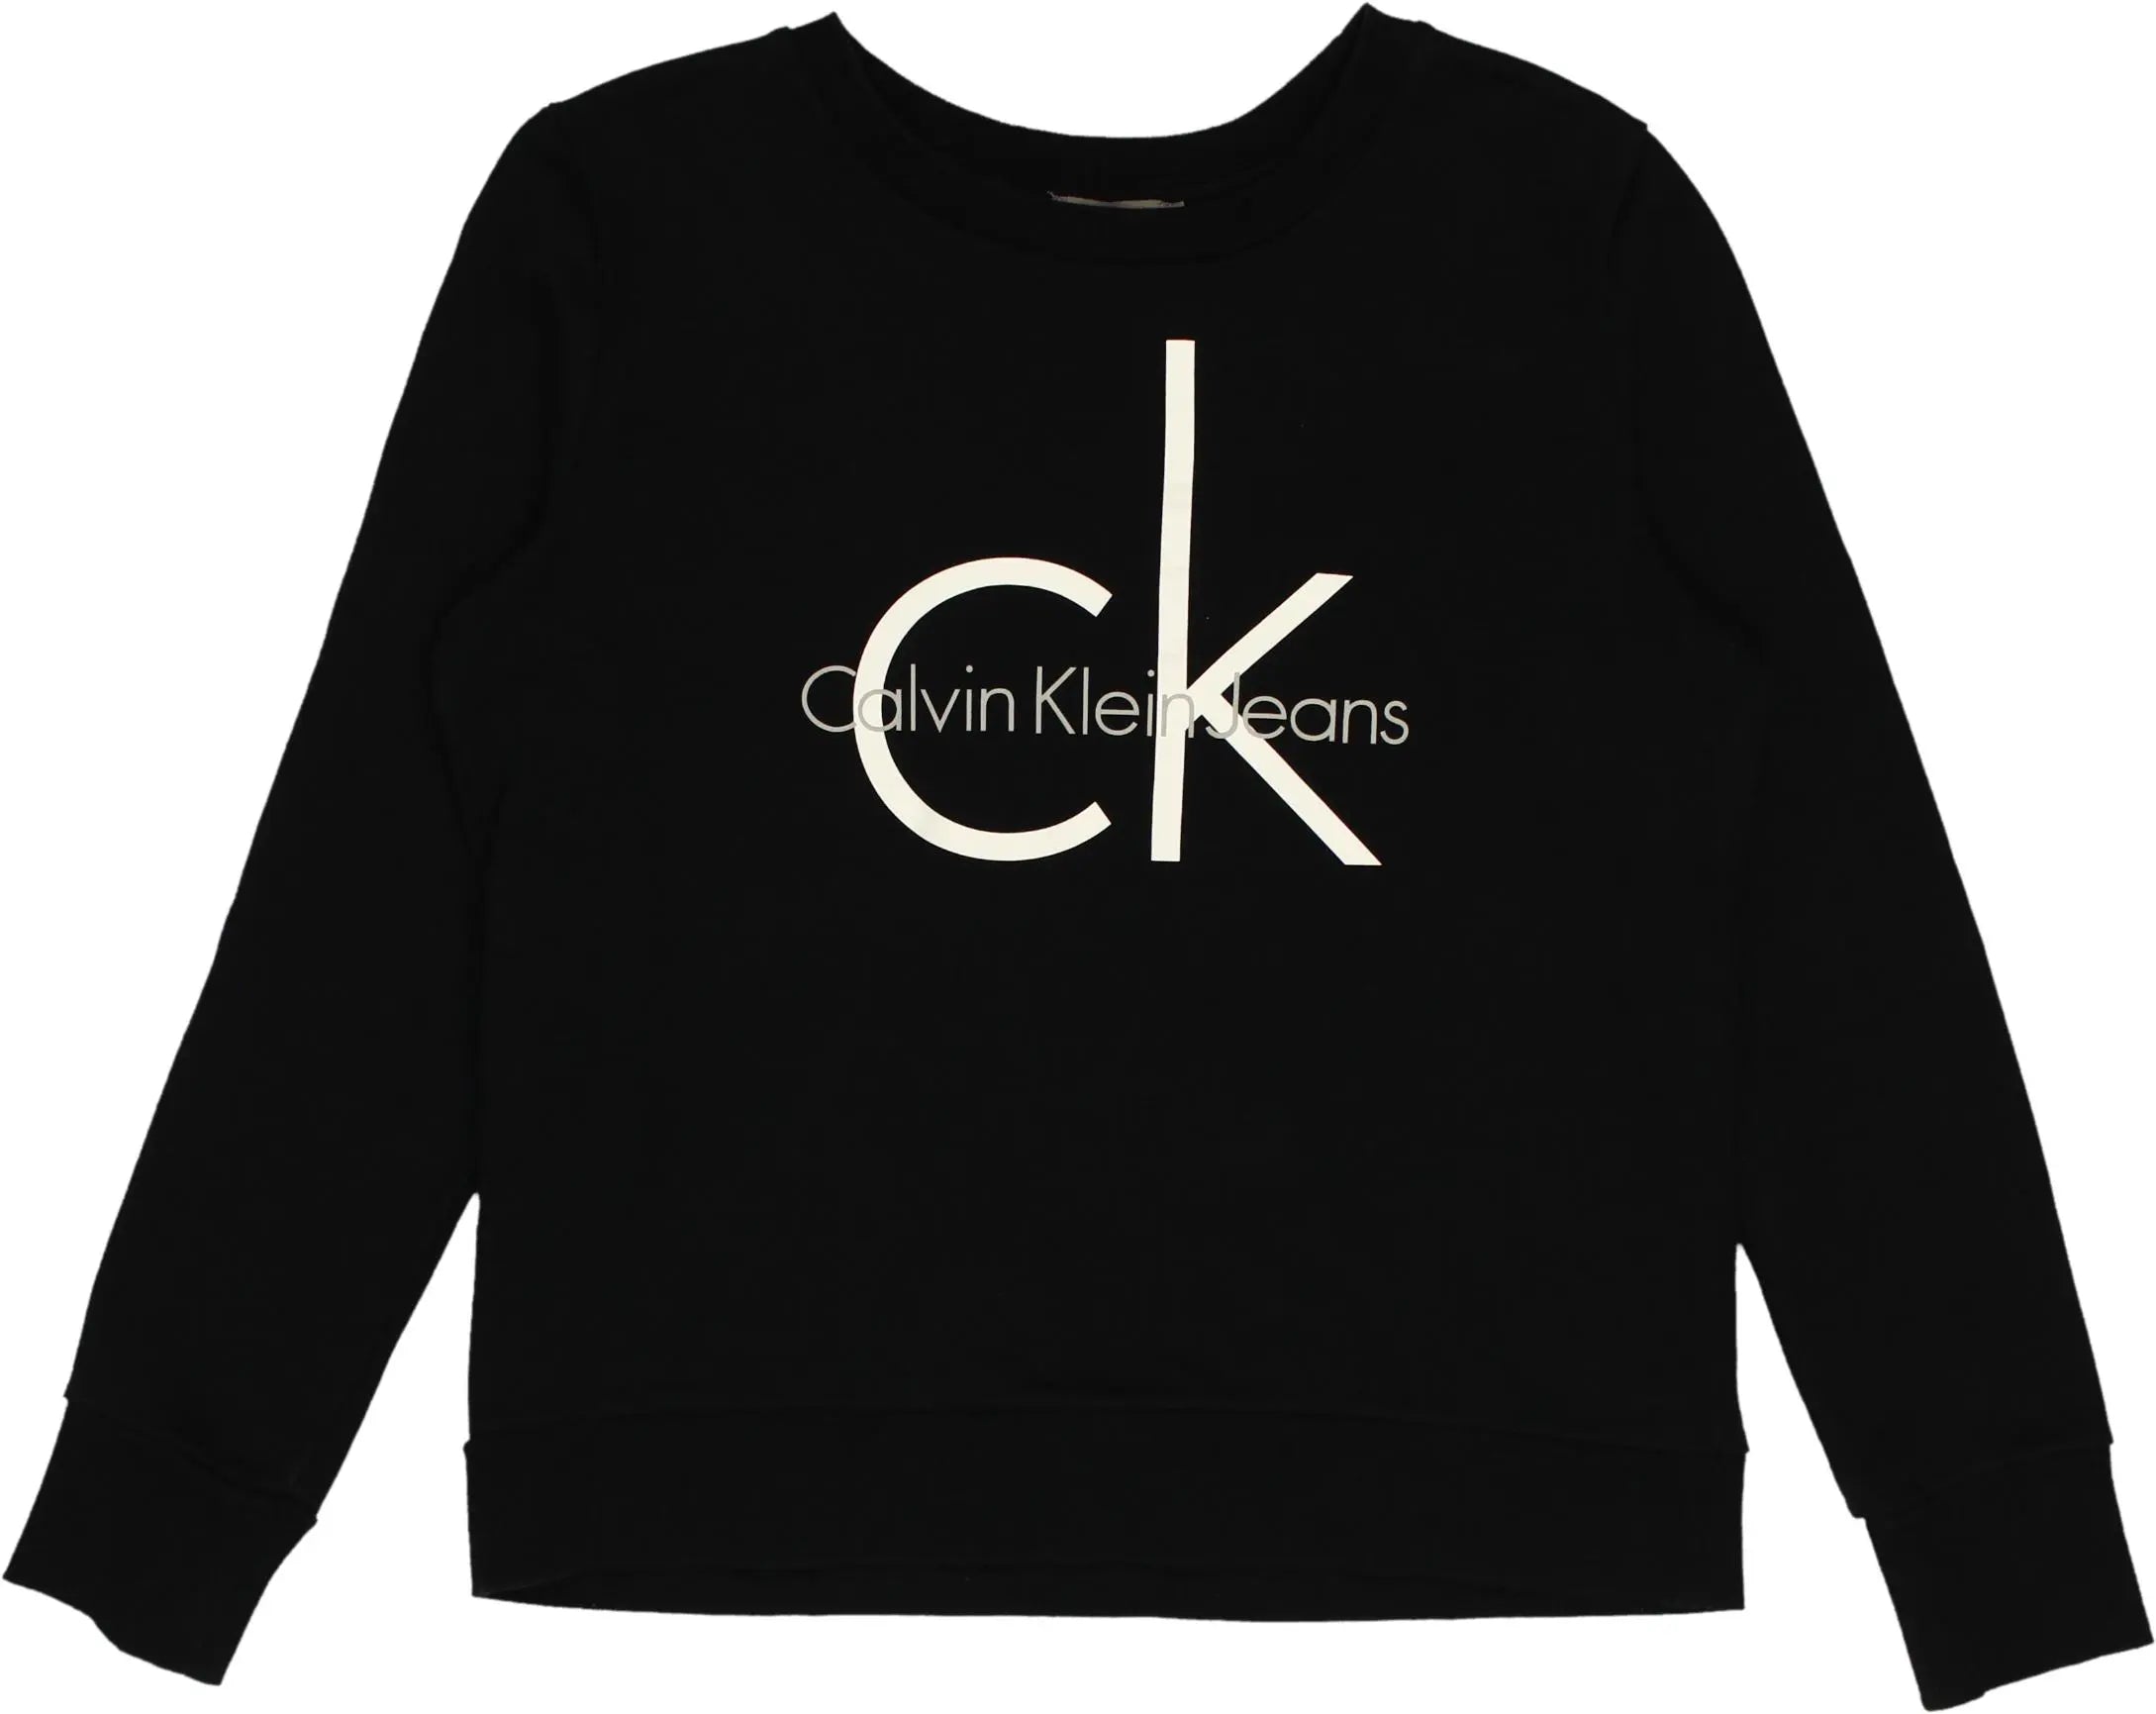 Calvin Klein Jeans - Black Calvin Klein sweater- ThriftTale.com - Vintage and second handclothing